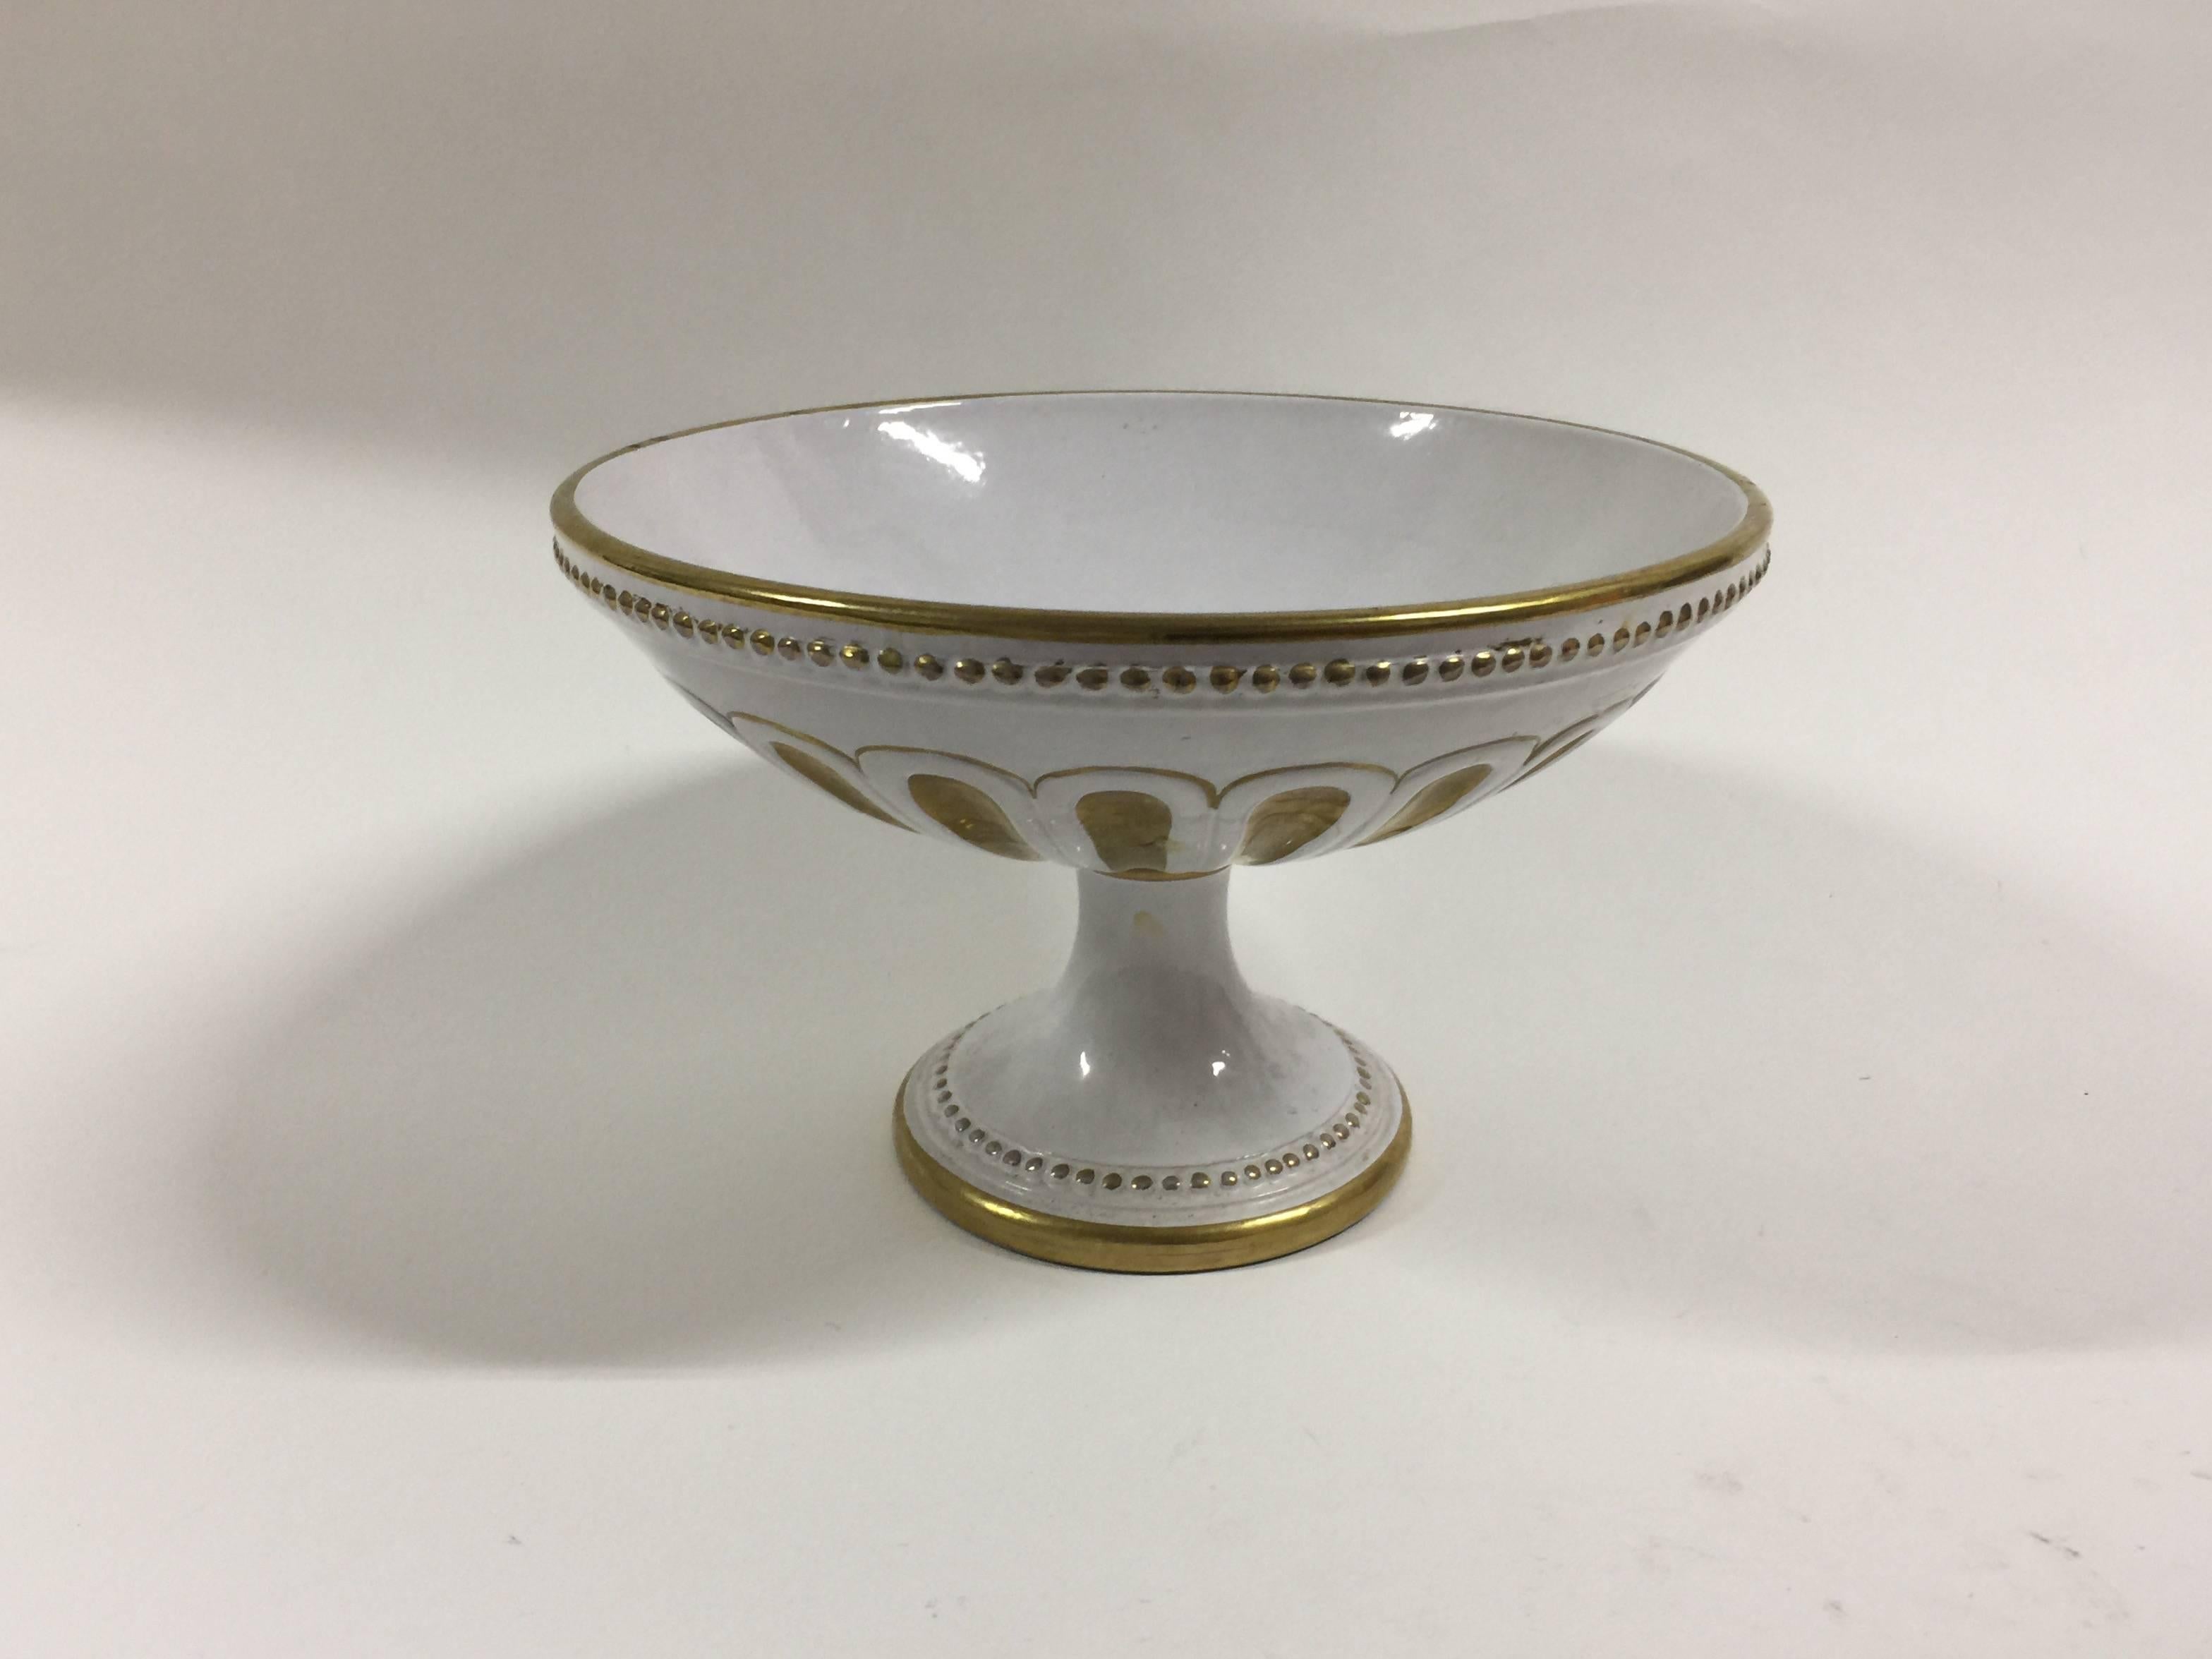 White porcelain centrepiece bowl / compote with gold decoration by Ugo Zaccagnini. Italy, circa 1930. Signed.